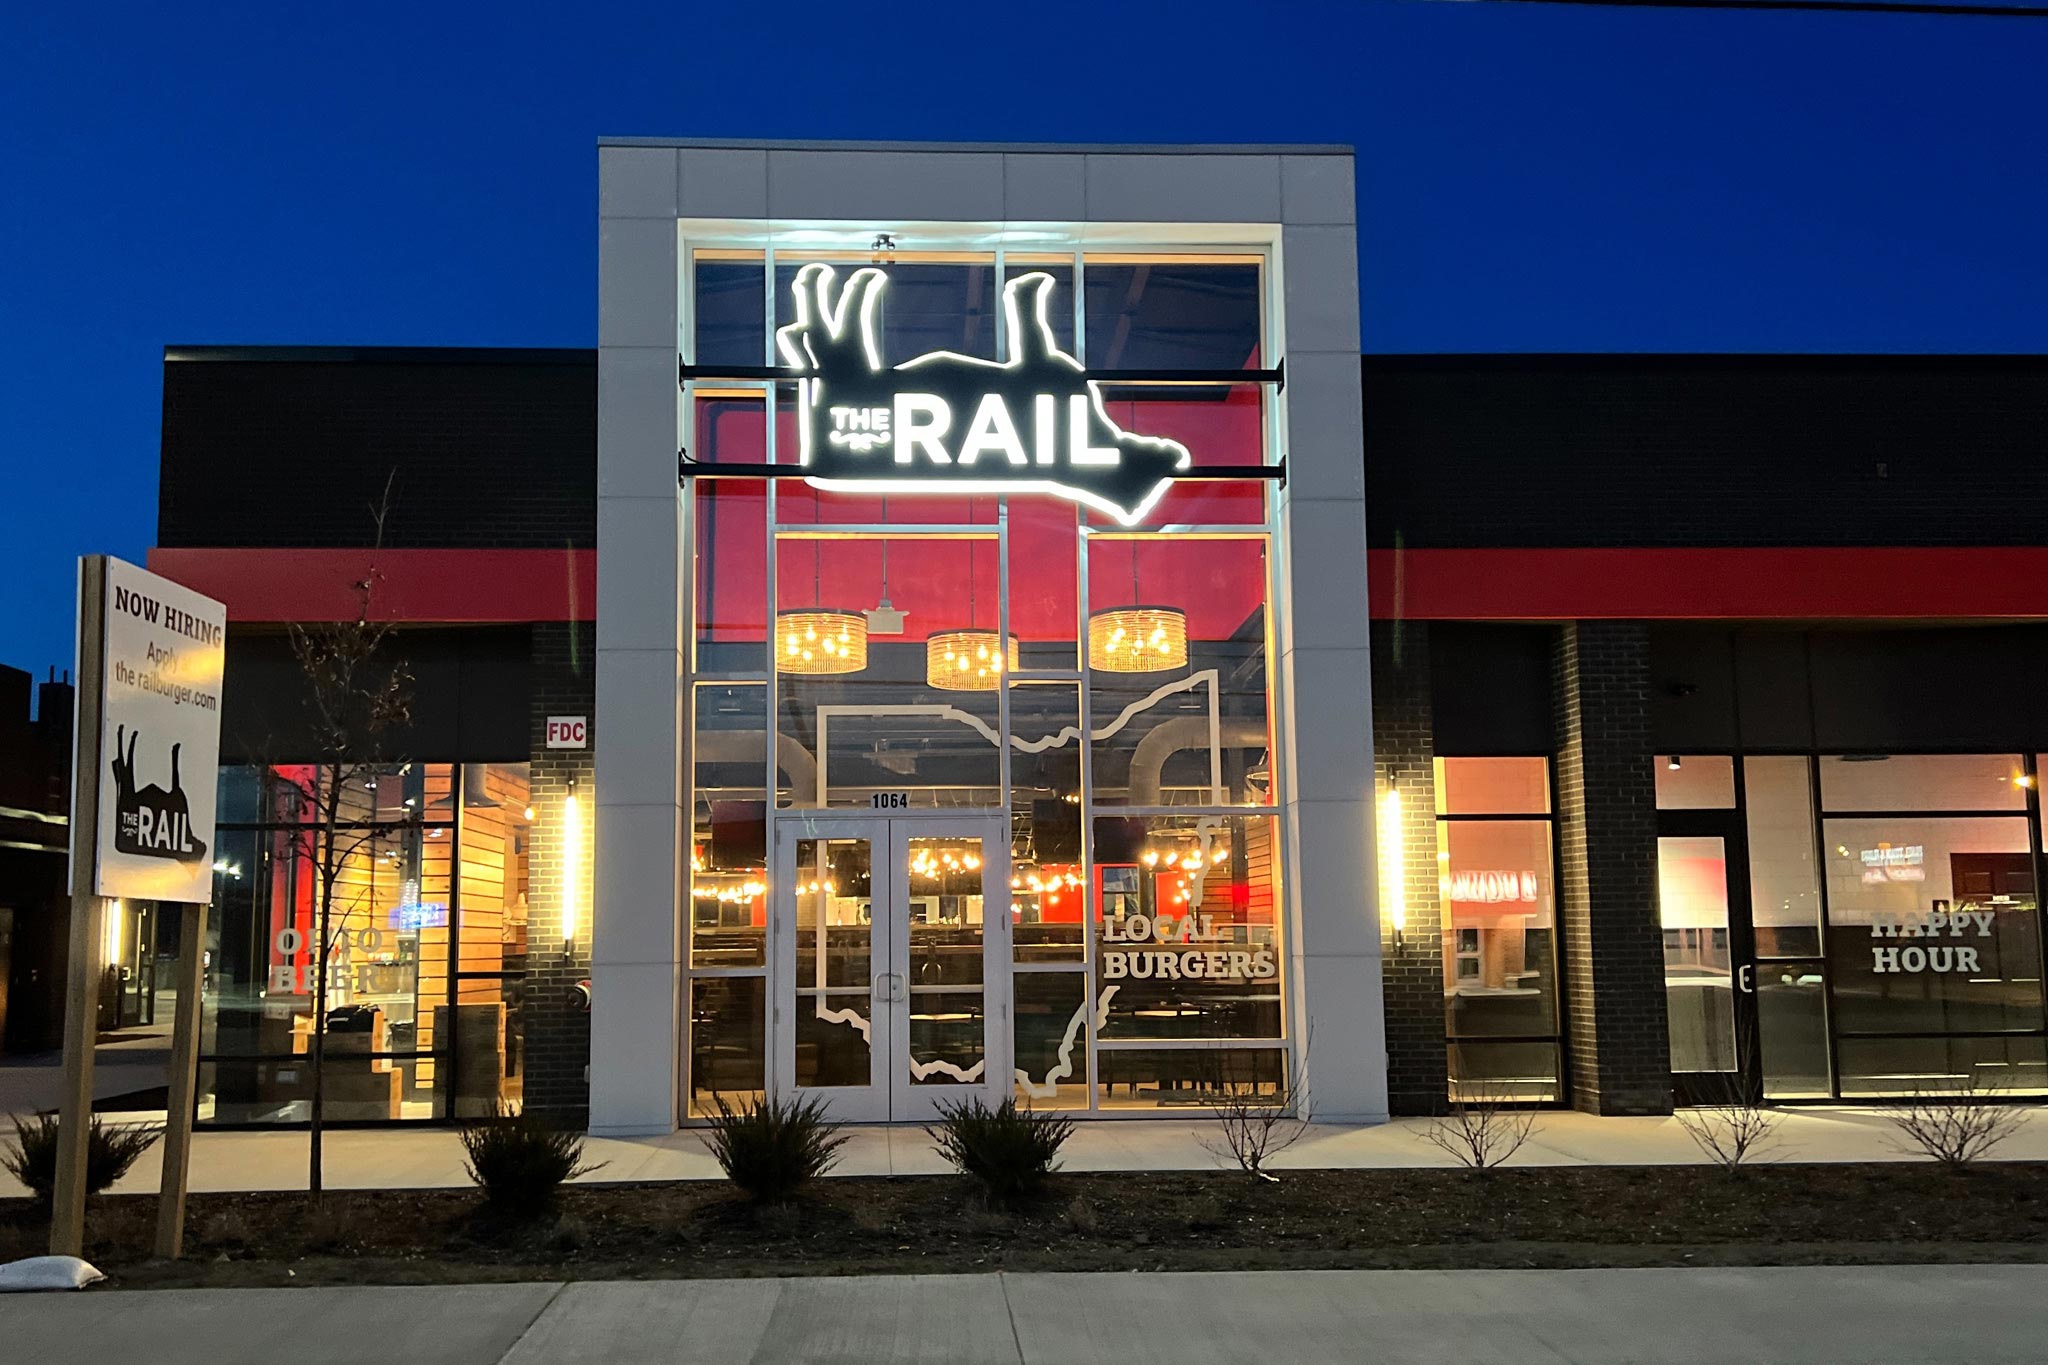 Best Contractor for Restaurant The Rail Front - Grandview, Ohio by Fred Olivieri